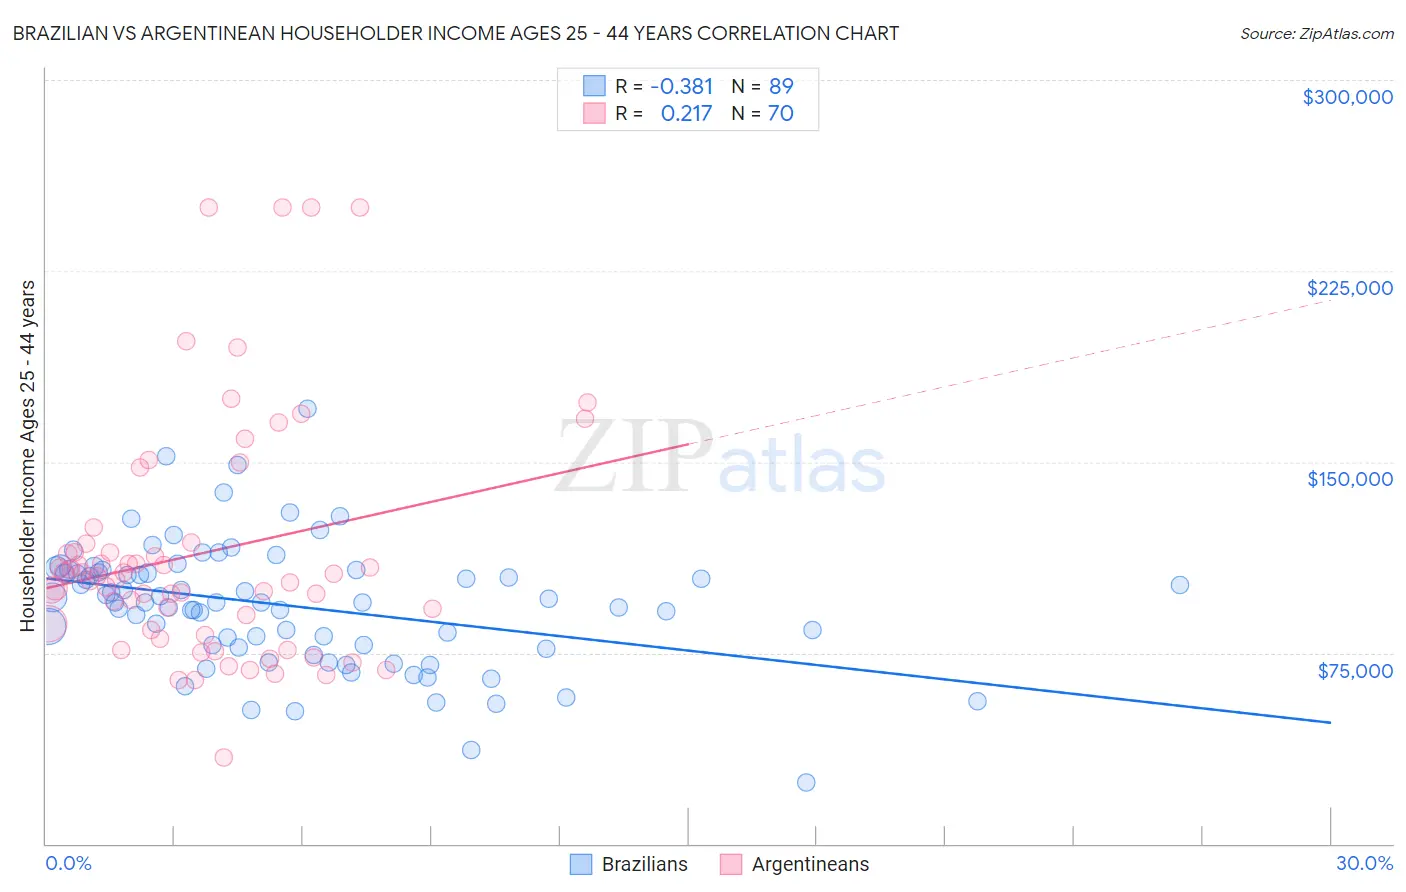 Brazilian vs Argentinean Householder Income Ages 25 - 44 years